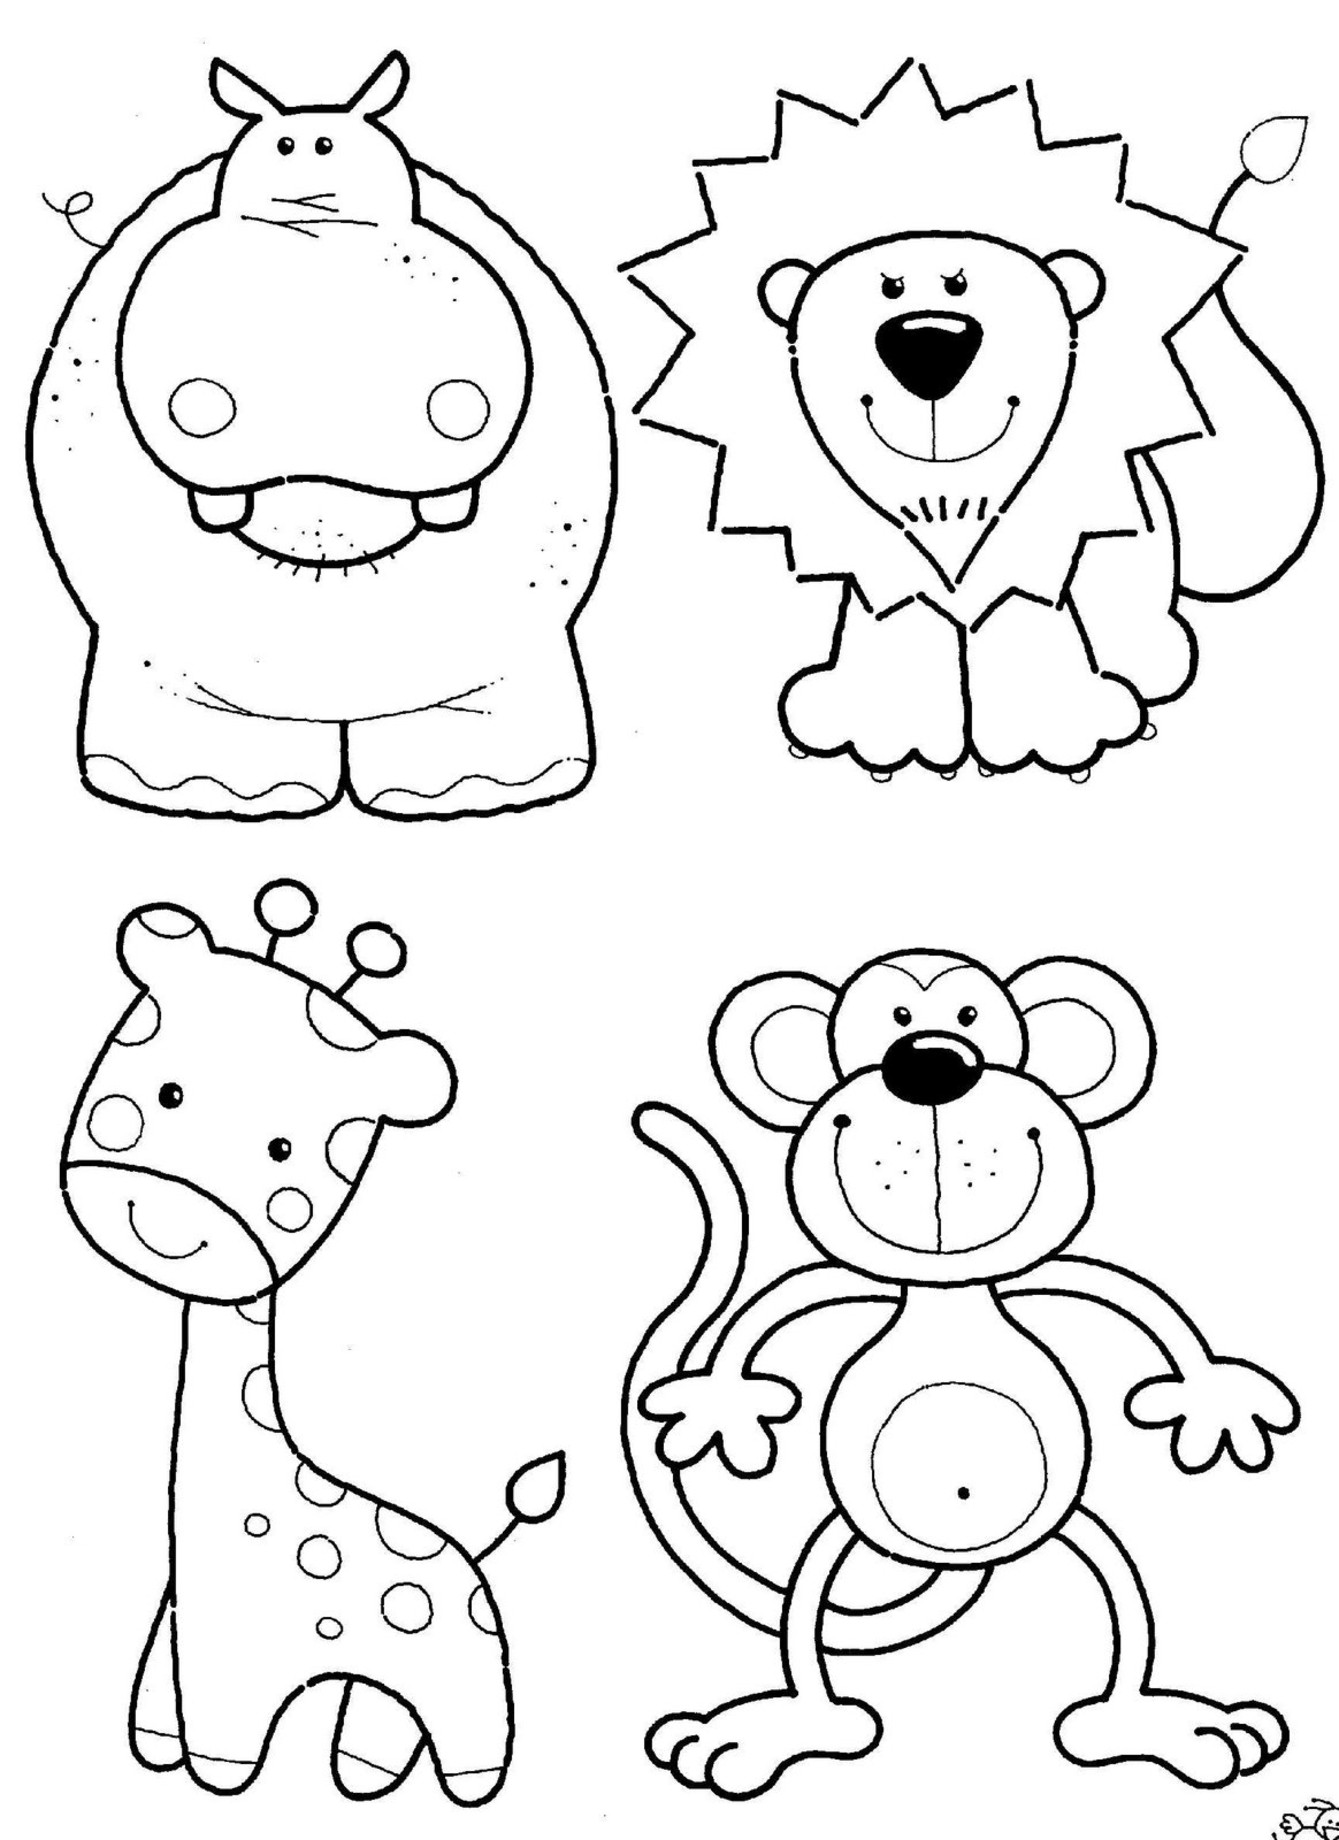 Free Color In Animals Download Free Color In Animals Png Images Free Cliparts On Clipart Library